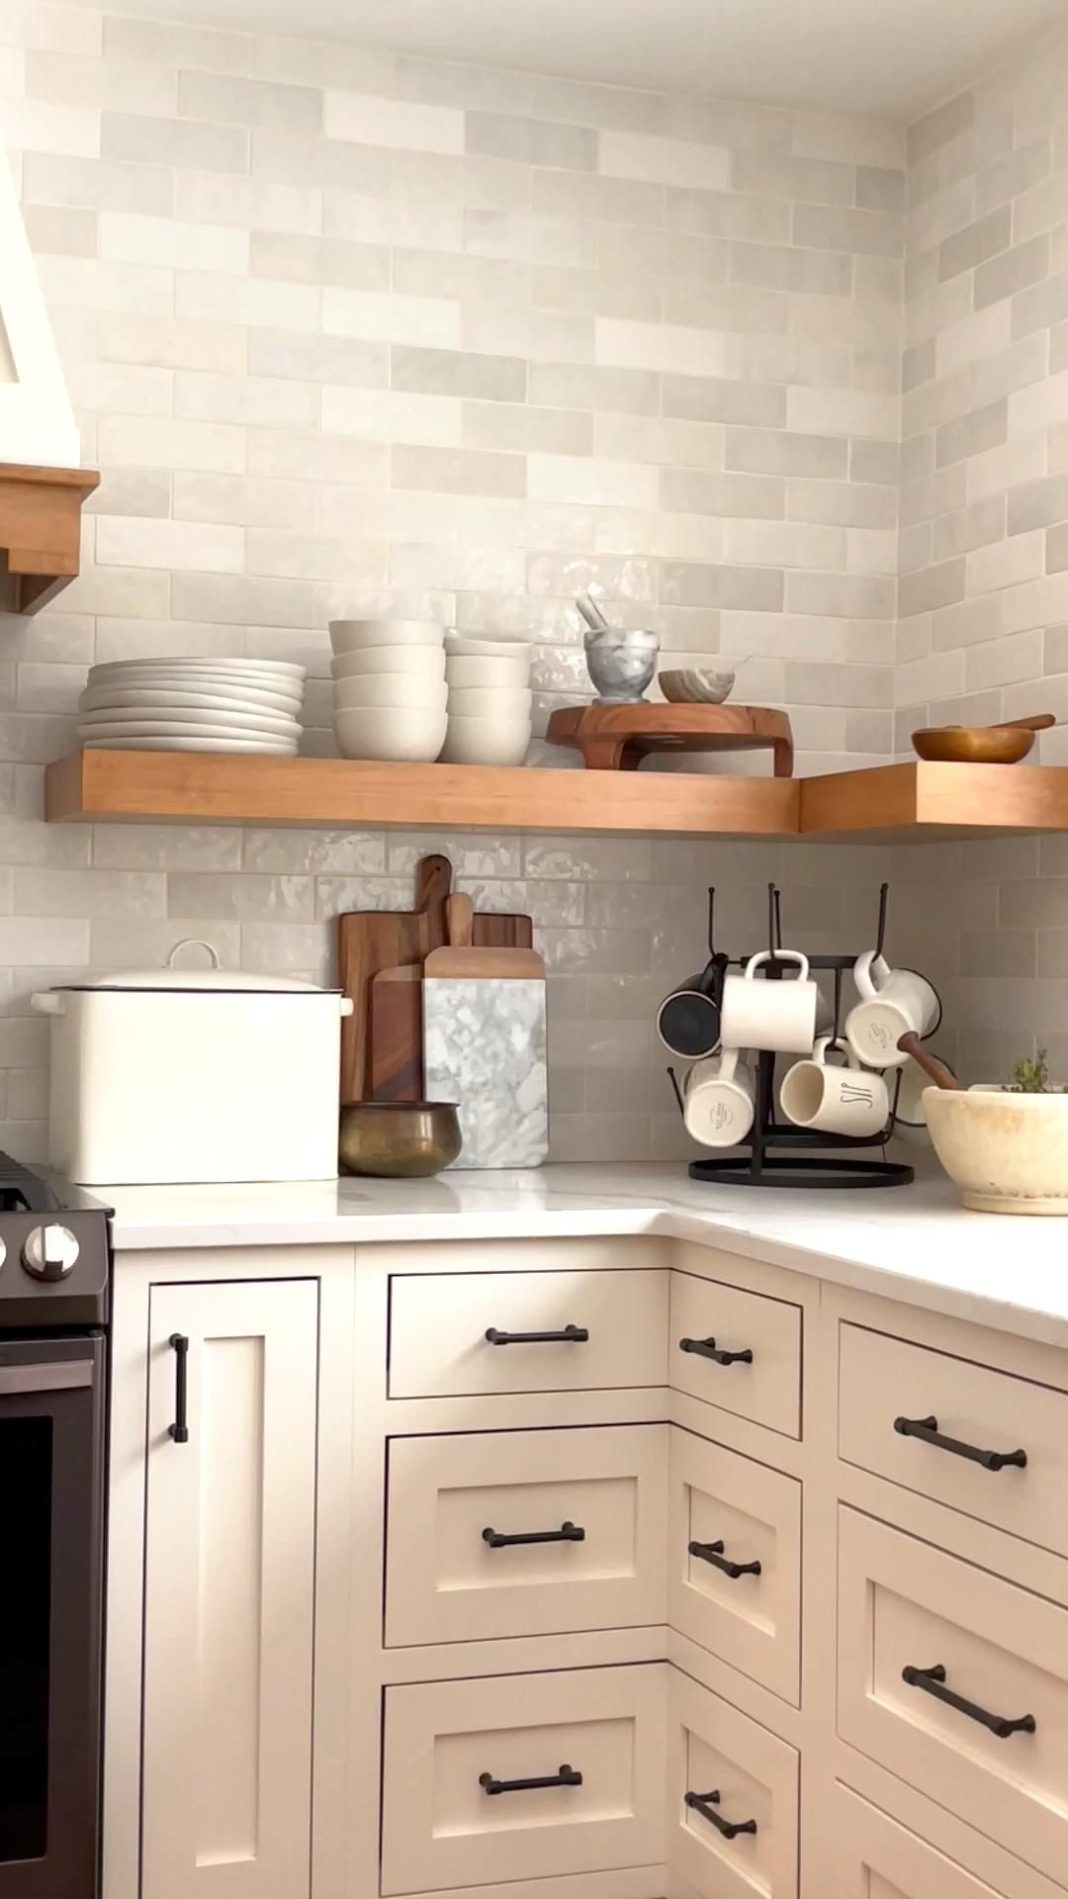 15 Pros & Cons of Floating Kitchen Shelves vs. Cabinets